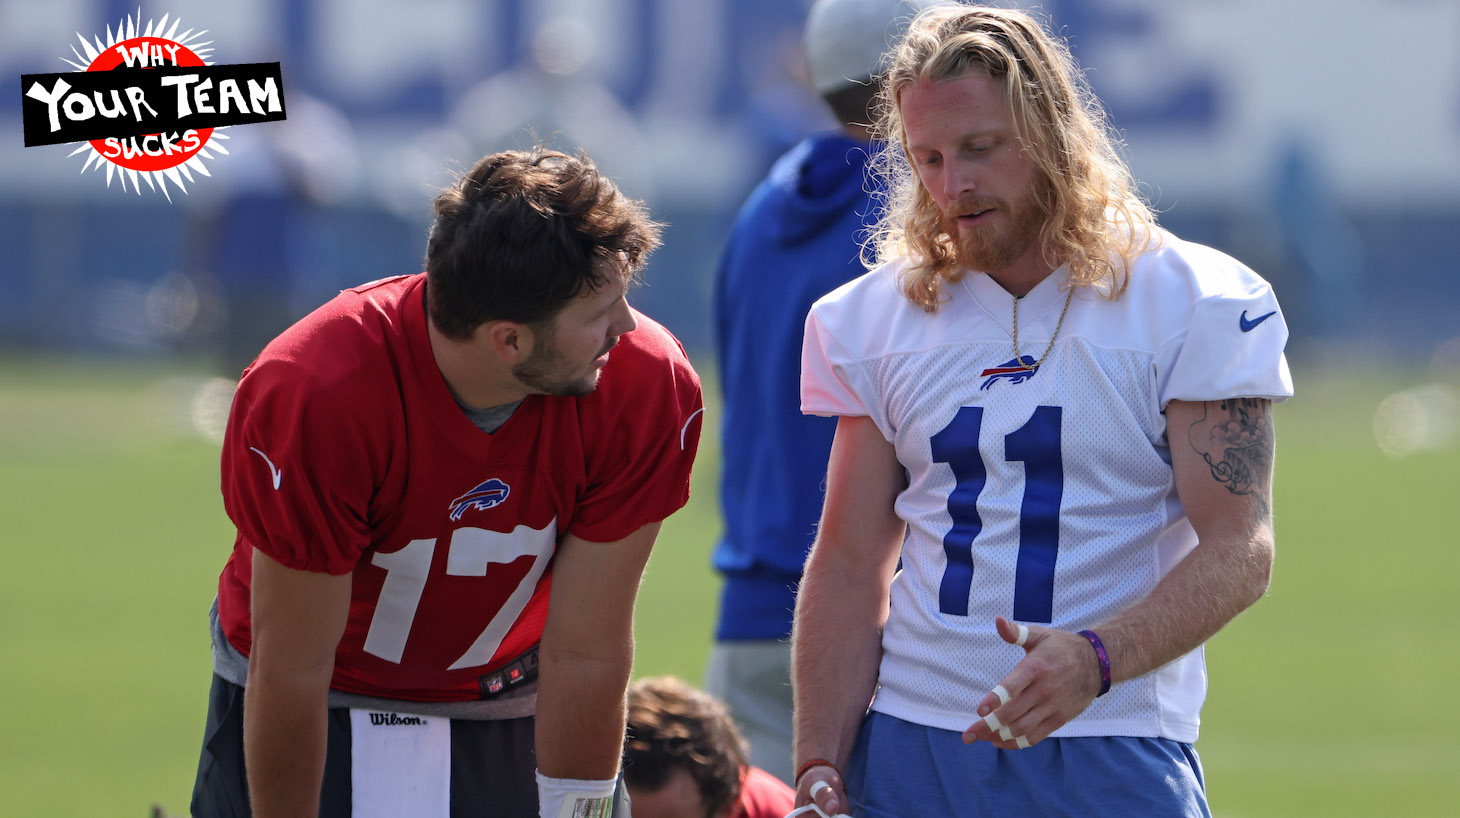 ORCHARD PARK, NY - JULY 28: Josh Allen #17 of the Buffalo Bills and Cole Beasley #11 of the Buffalo Bills talk during training camp at the Adpro Sports Training Center on July 28, 2021 in Orchard Park, New York. (Photo by Timothy T Ludwig/Getty Images)